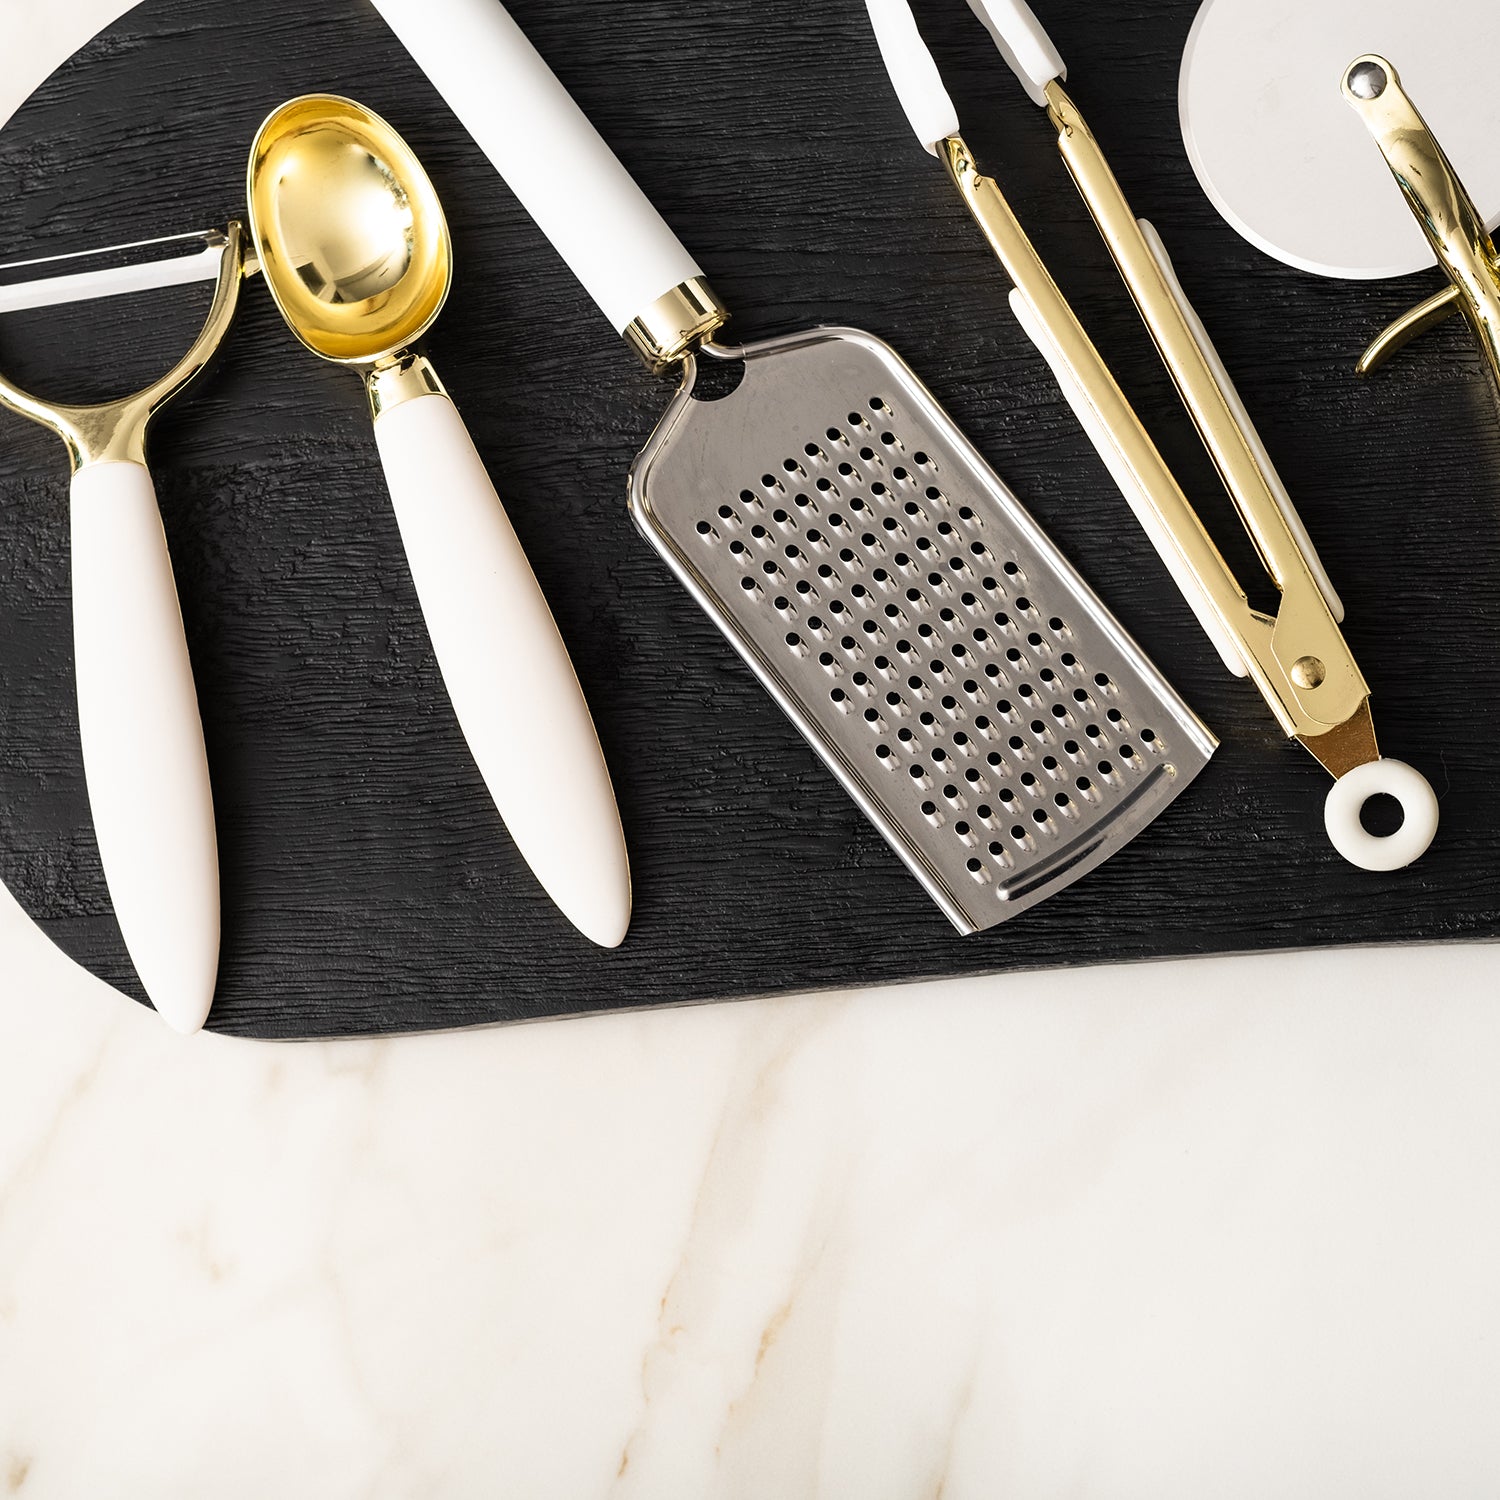 White and Gold Kitchen Tool Set - Styled Settings